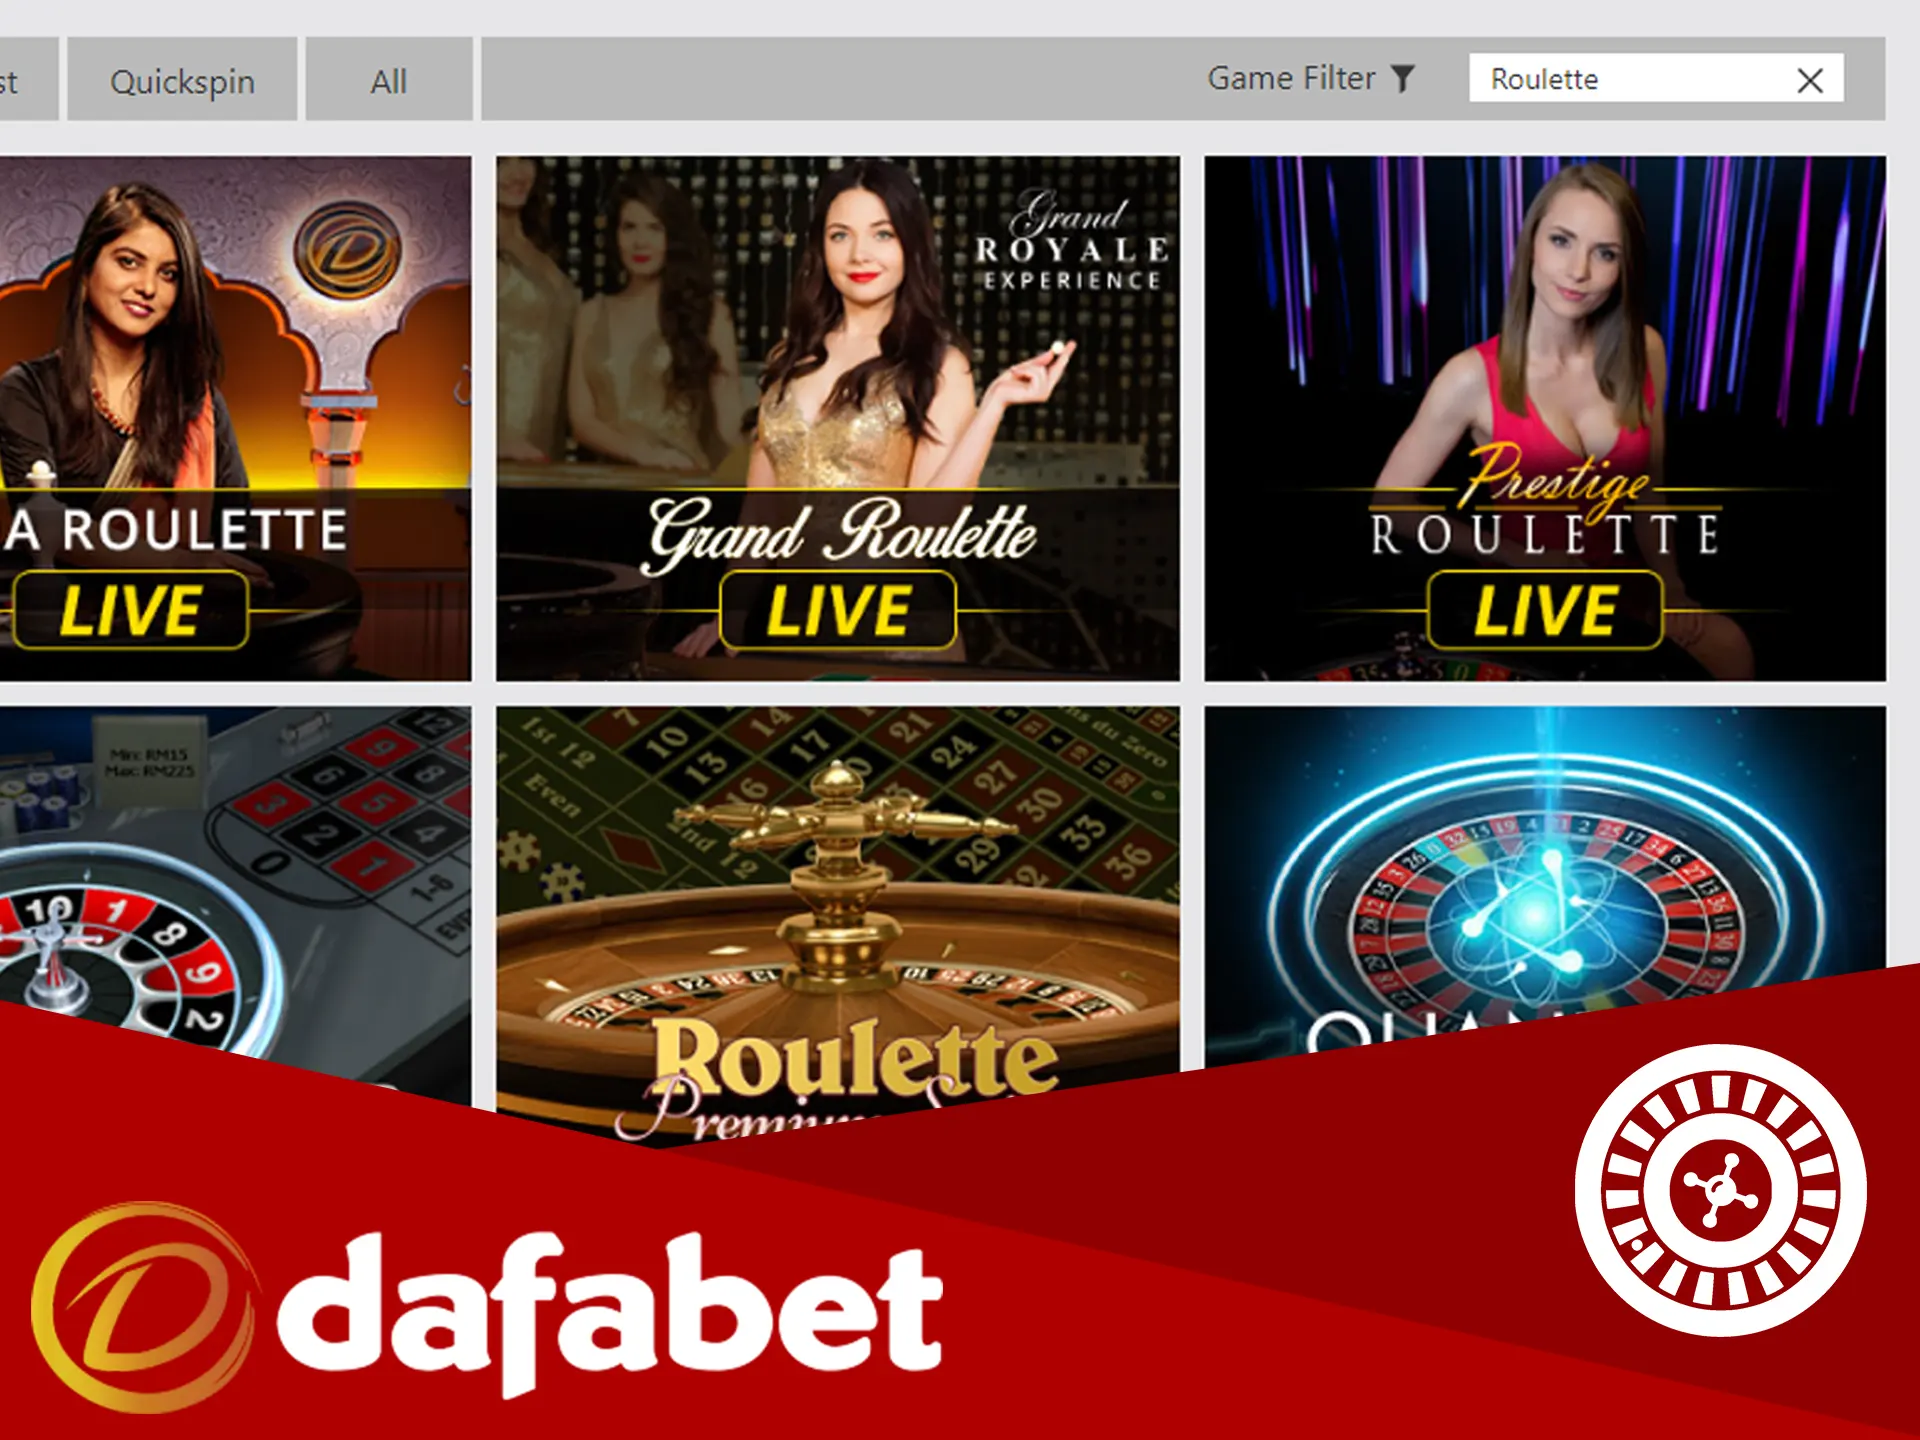 Dafabet Casino has a wide variety of roulette games.